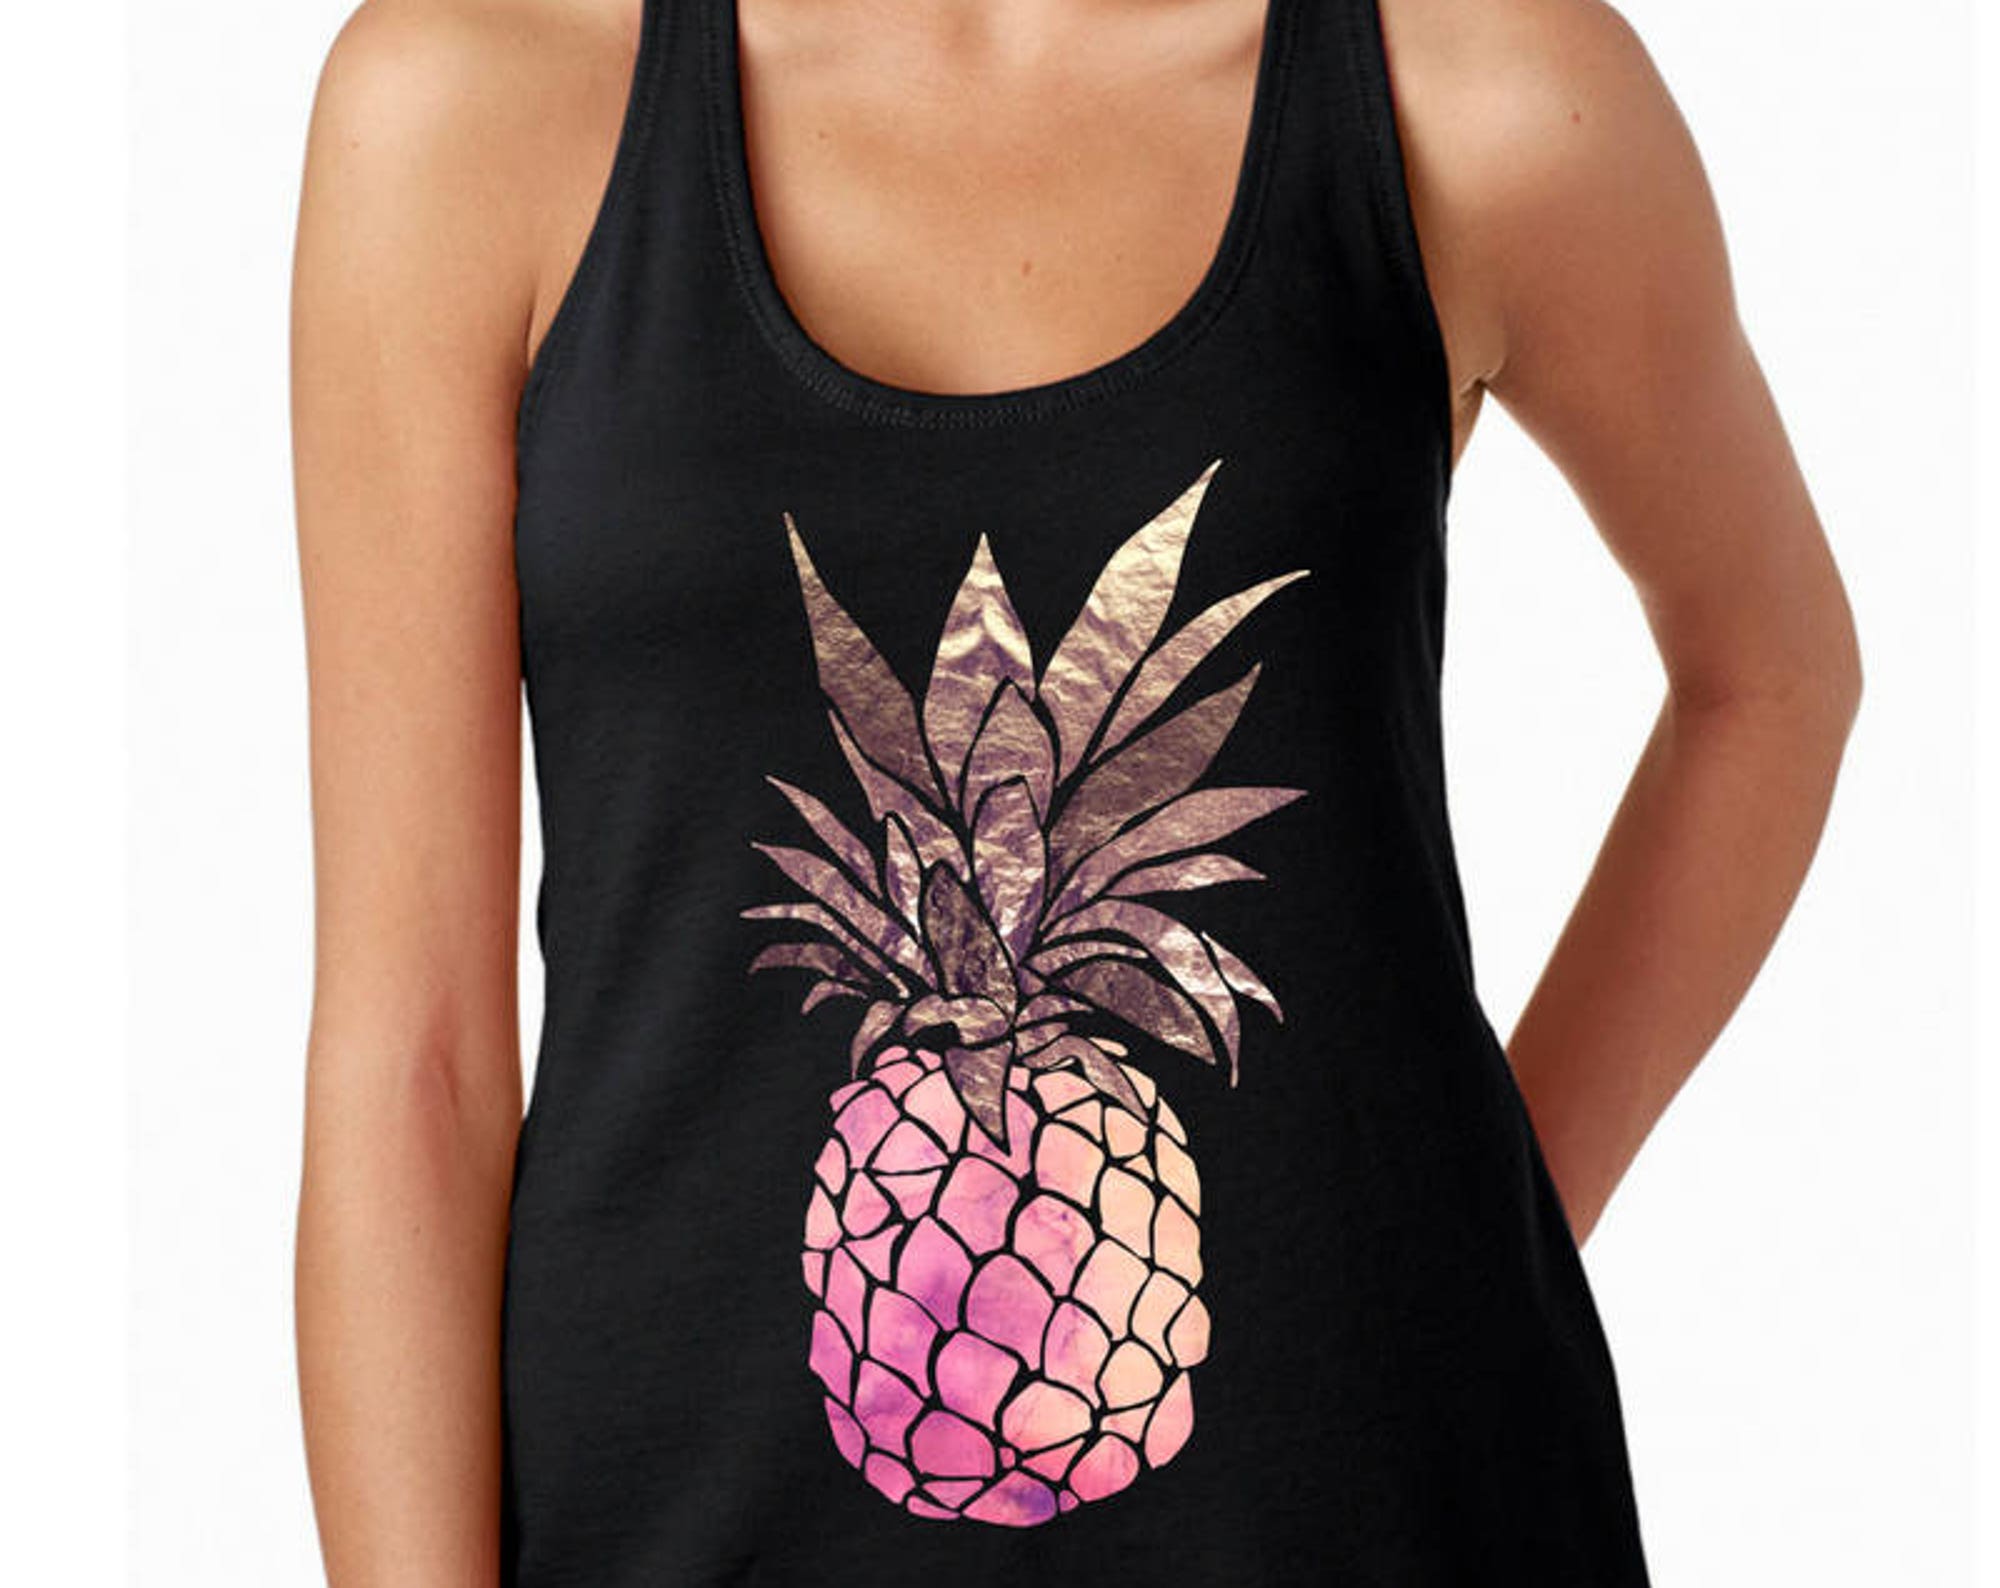 Discover Pineapple shirt for women, be a pineapple shirt